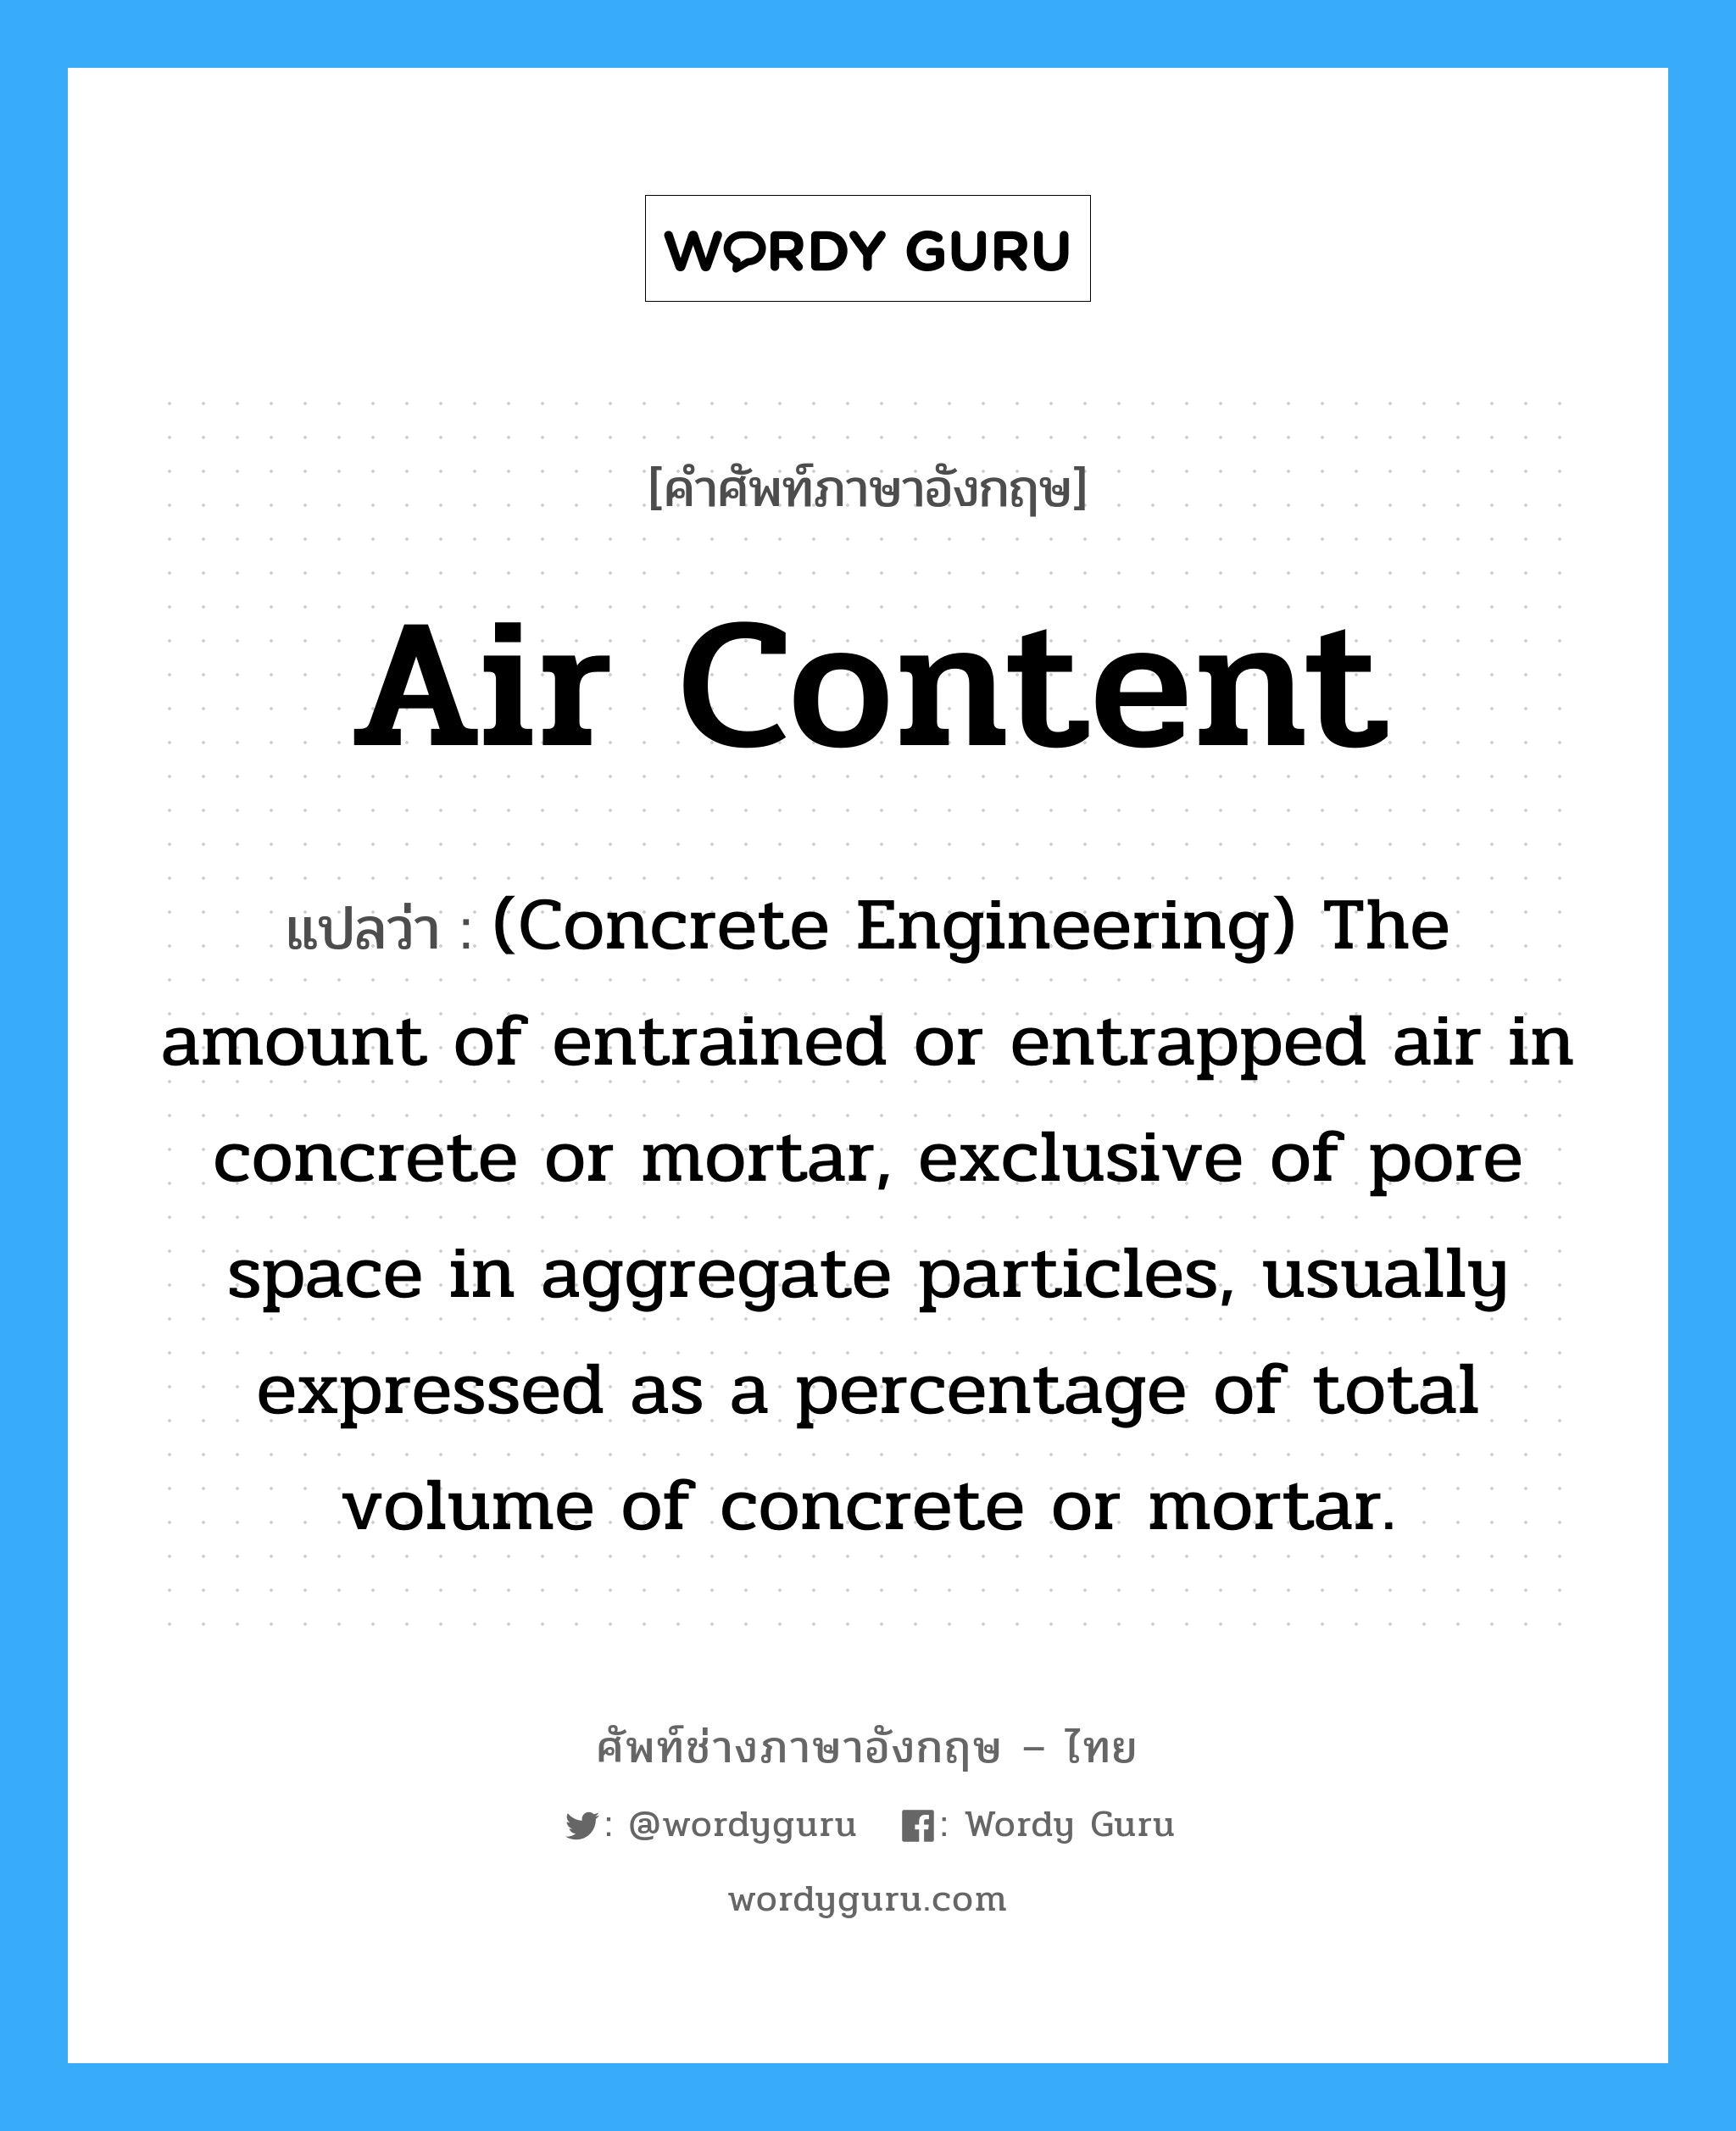 (Concrete Engineering) The amount of entrained or entrapped air in concrete or mortar, exclusive of pore space in aggregate particles, usually expressed as a percentage of total volume of concrete or mortar. ภาษาอังกฤษ?, คำศัพท์ช่างภาษาอังกฤษ - ไทย (Concrete Engineering) The amount of entrained or entrapped air in concrete or mortar, exclusive of pore space in aggregate particles, usually expressed as a percentage of total volume of concrete or mortar. คำศัพท์ภาษาอังกฤษ (Concrete Engineering) The amount of entrained or entrapped air in concrete or mortar, exclusive of pore space in aggregate particles, usually expressed as a percentage of total volume of concrete or mortar. แปลว่า Air Content